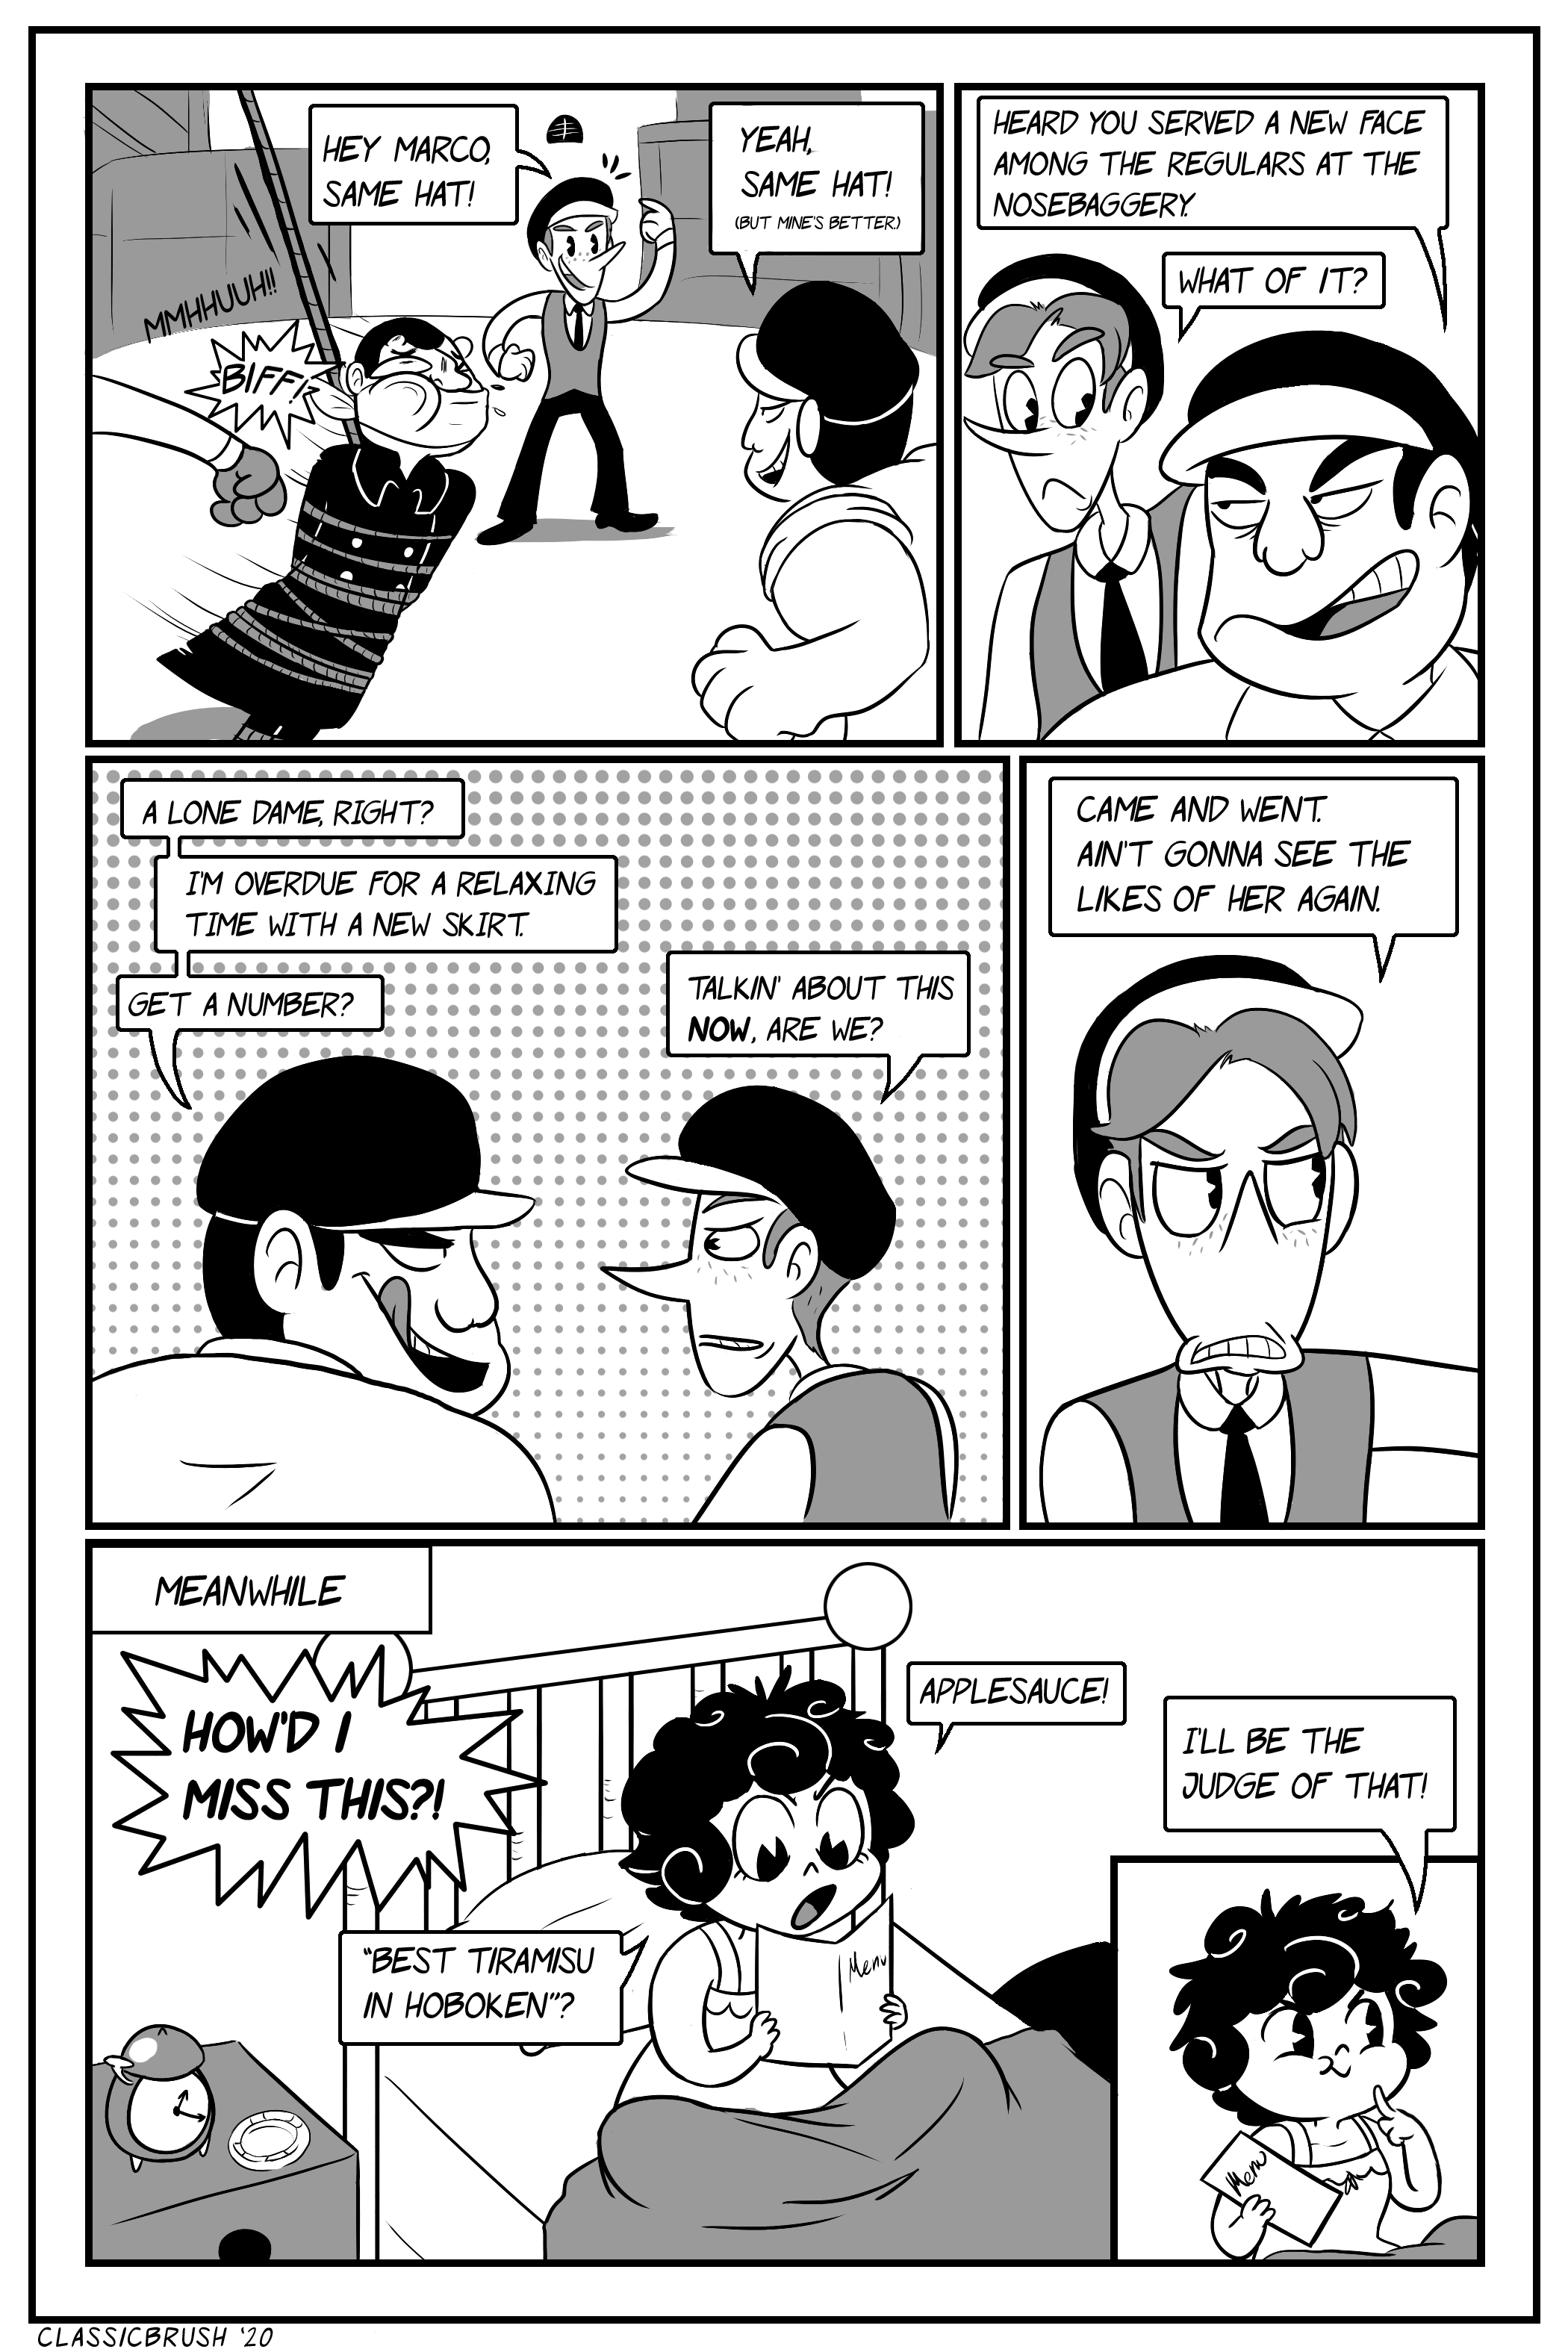 Panel 1: The officer is tossed around in between punches by the gang. Harrison takes a moment to casually chat with Marco. â€œHey Marco, same hat!â€ He points to his hat. Marco responds â€œYeah, same hat! (But mineâ€™s better.)â€ Panel 2: Marco approaches Harrison. â€œHeard you served a new face among the regulars at the nosebaggery.â€ Harrison looks to him, confused. â€œWhat of it?â€ Panel 3: Marco licks his lips. â€œA lone dame, right? Iâ€™m overdue for a relaxing time with a new skirt. Get a number?â€ Harrison is put off by the timing of this discussion. â€œTalkinâ€™ about this NOW, are we?â€ Panel 4: Harrison continues. â€œCame and went. Ainâ€™t gonna see the likes of her again.â€ Panel 5: Cut to a â€œMeanwhileâ€ with Audrey in her bed looking through a Fleischerâ€™s restaurant menu. â€œHOWâ€™D I MISS THIS?! â€˜Best tiramisu in Hoboken?â€™ Applesauce!â€ Panel 6: Audrey closes the menu with a cheeky grin. â€œIâ€™ll be the judge of that!â€